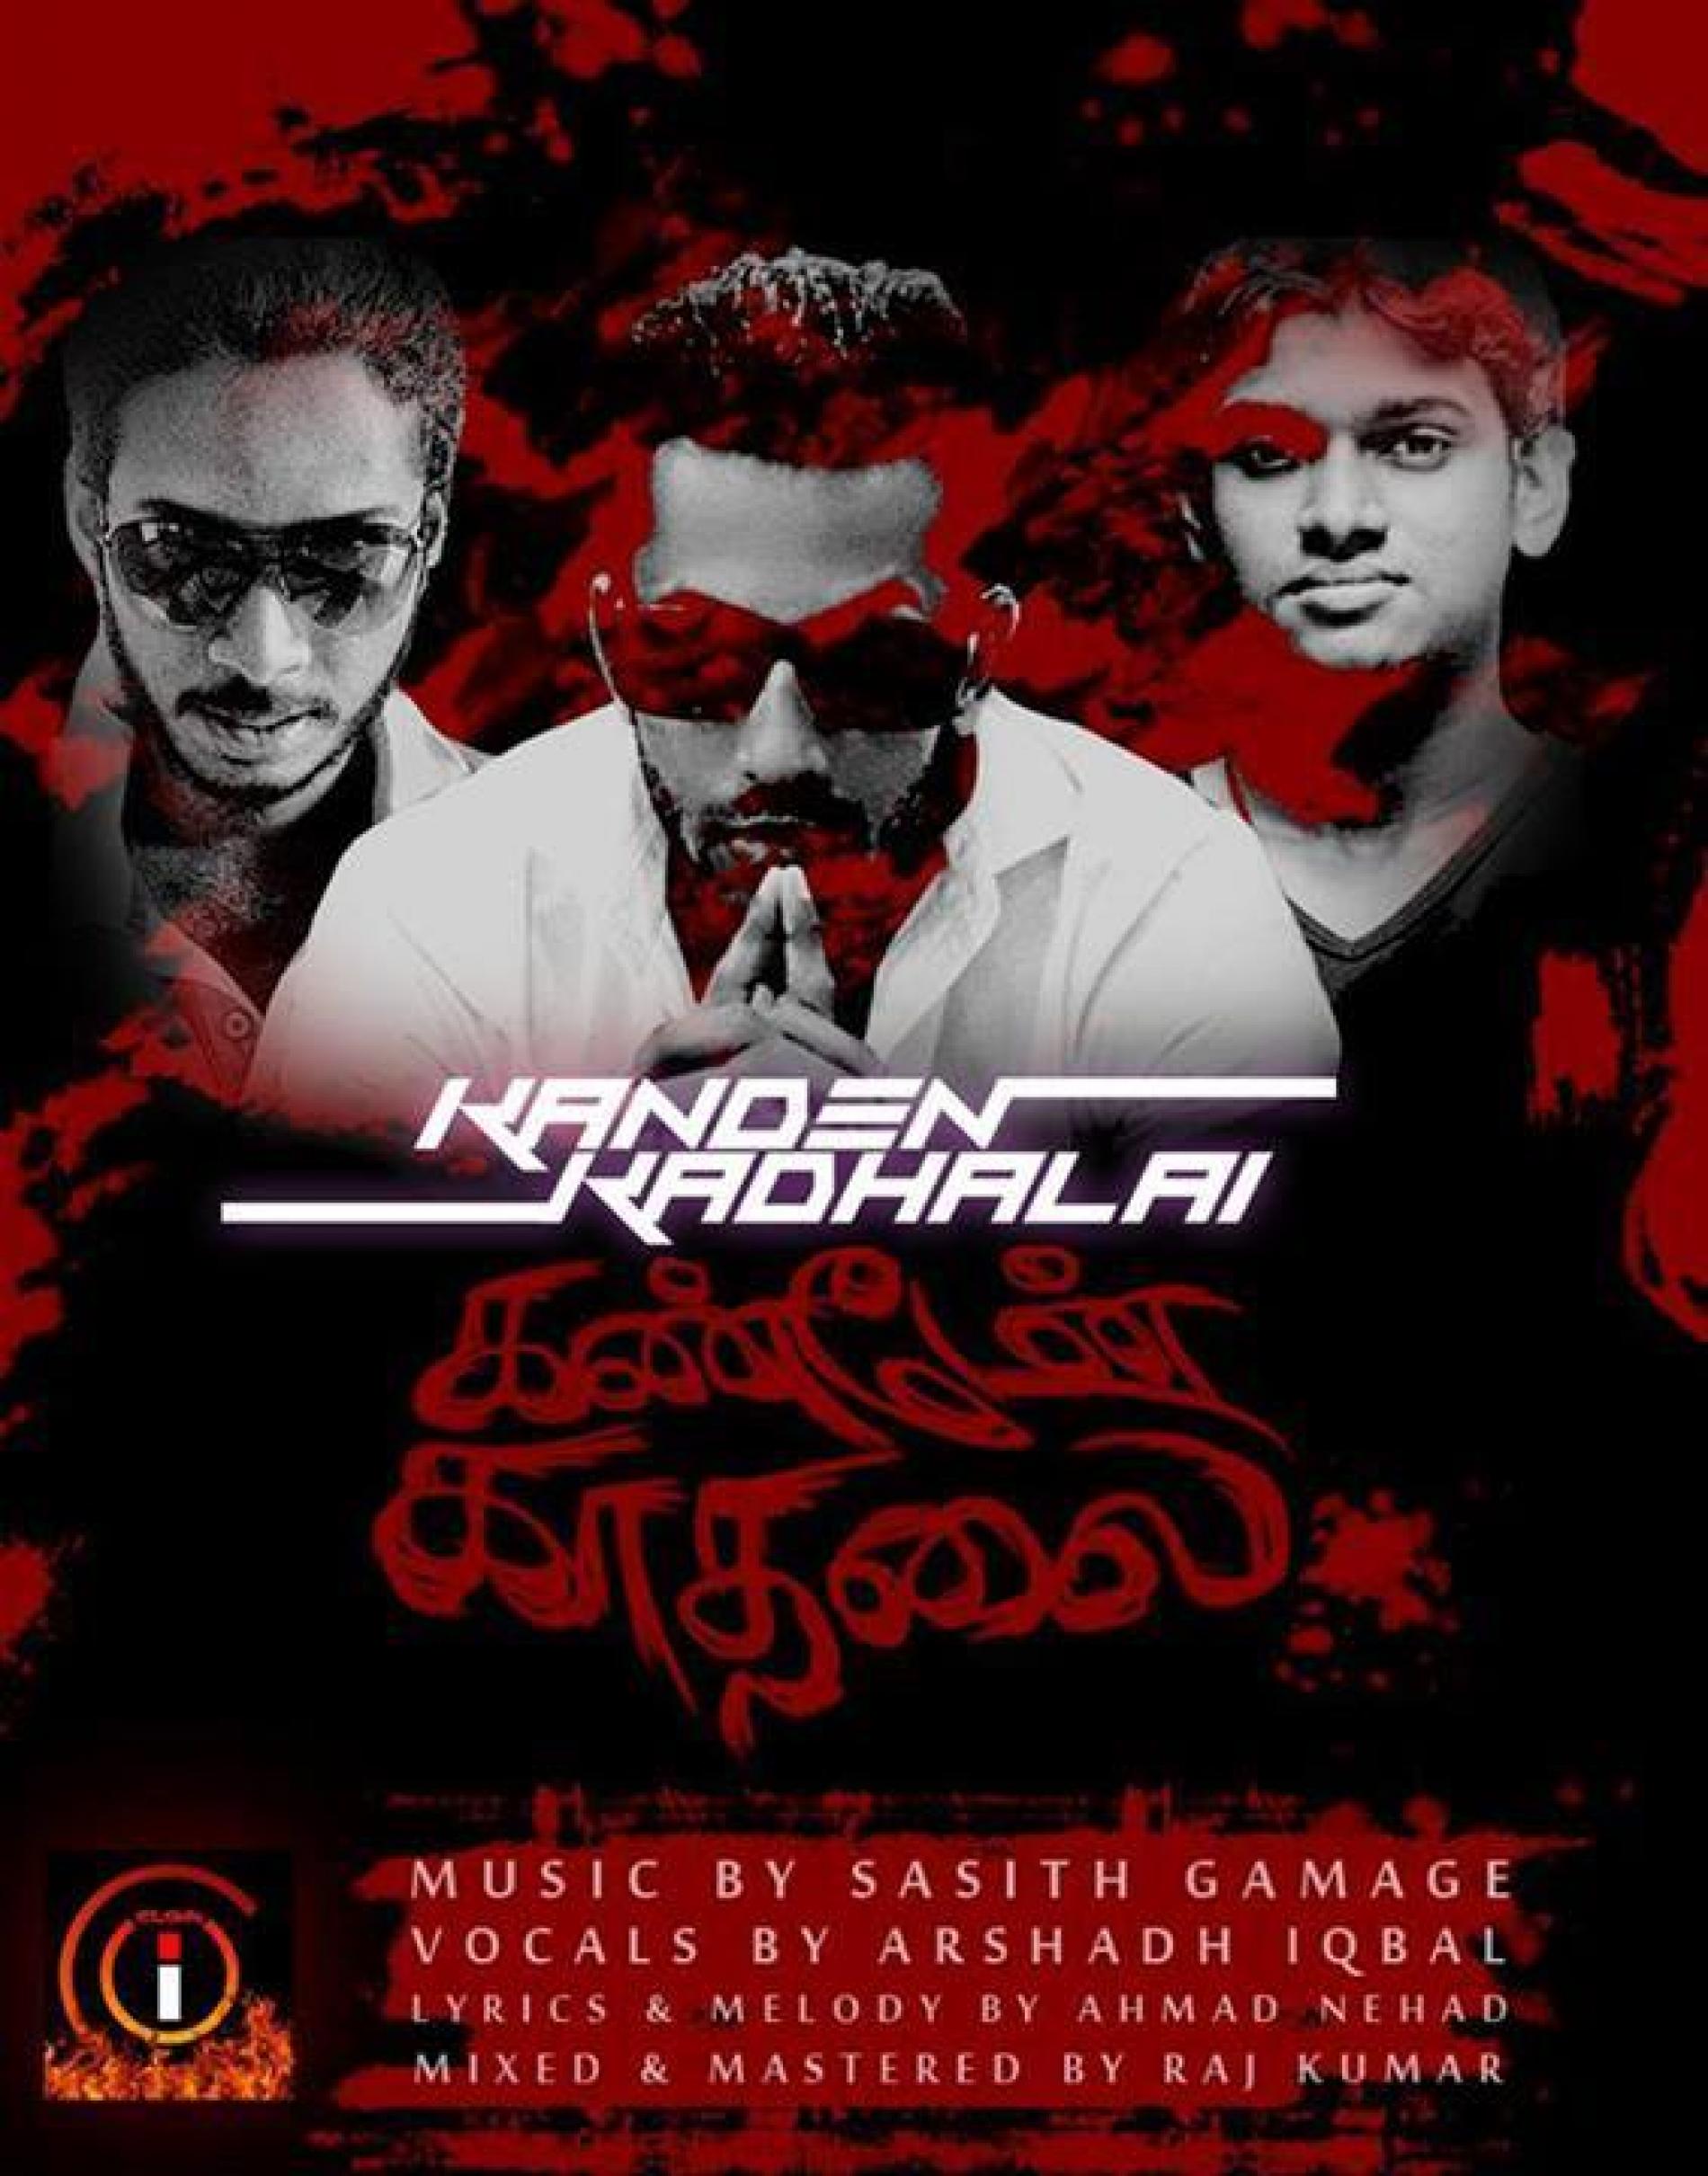 More Different Tamil Music In The Near Future